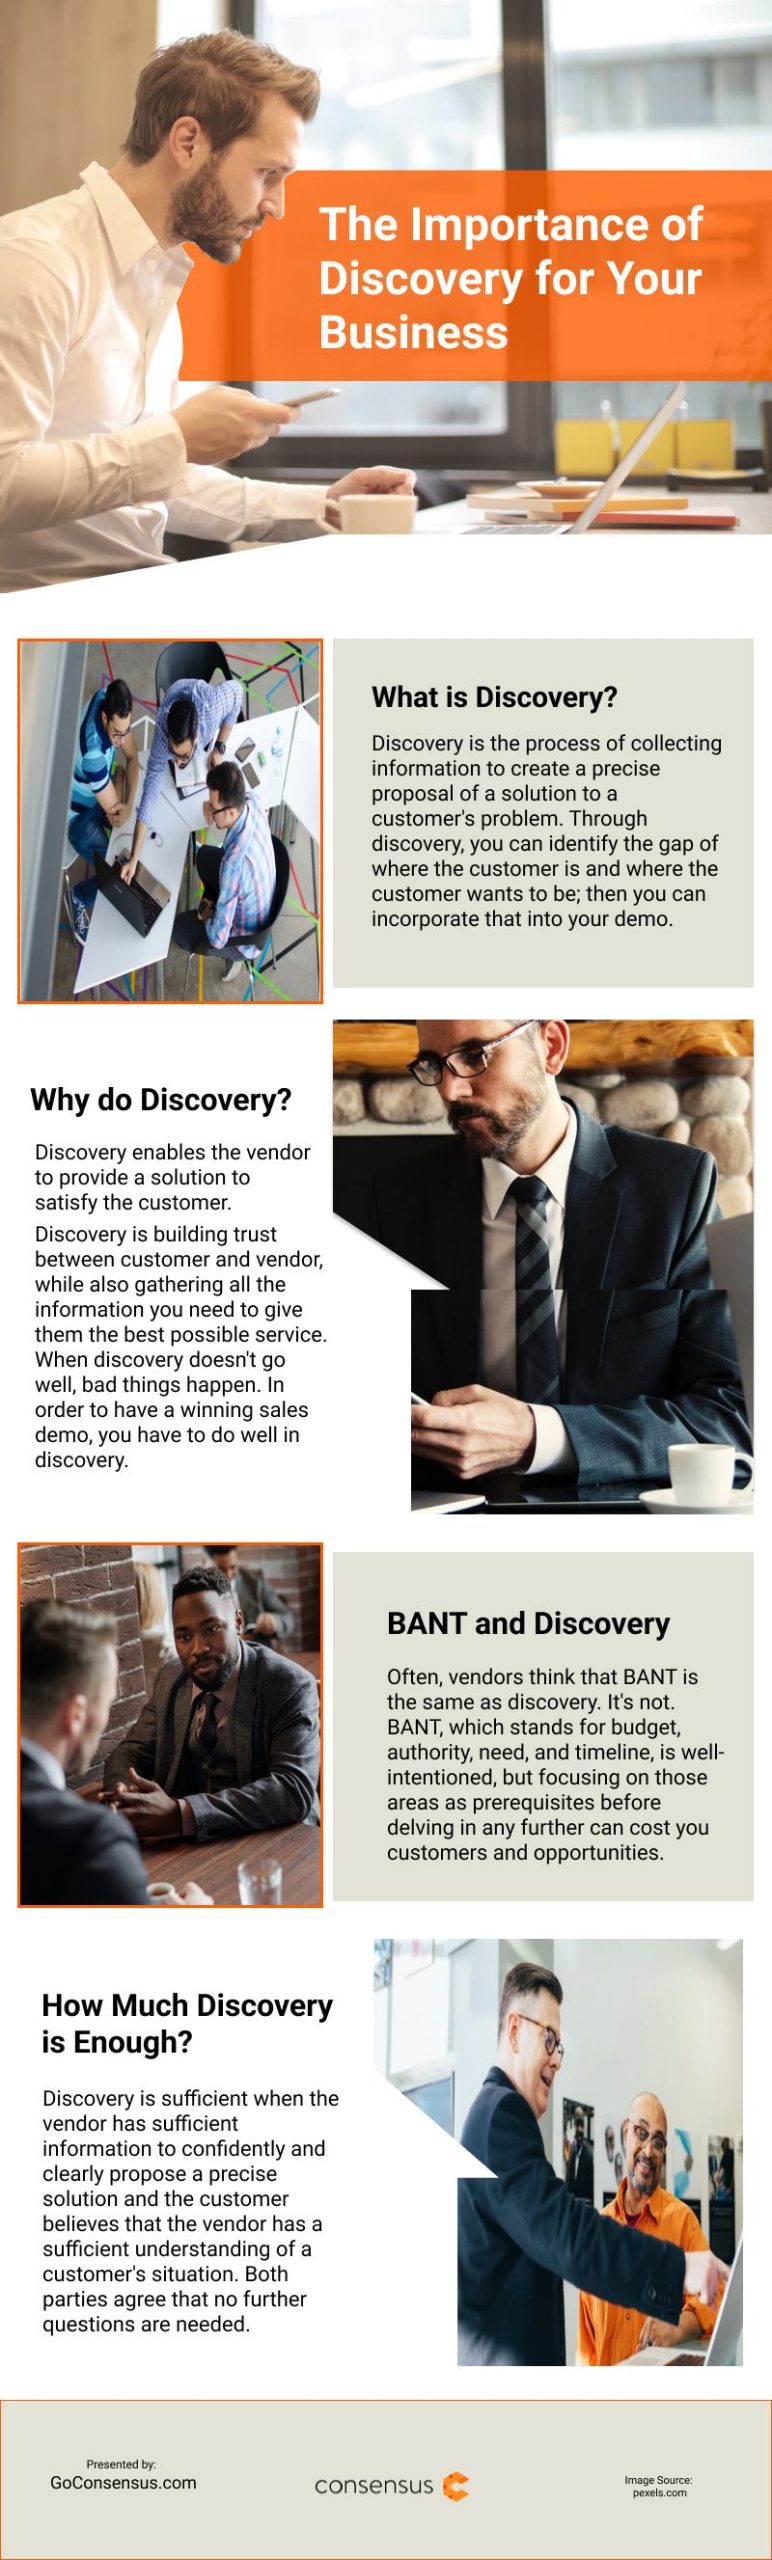 The Importance of Discovery for Your Business Infographic